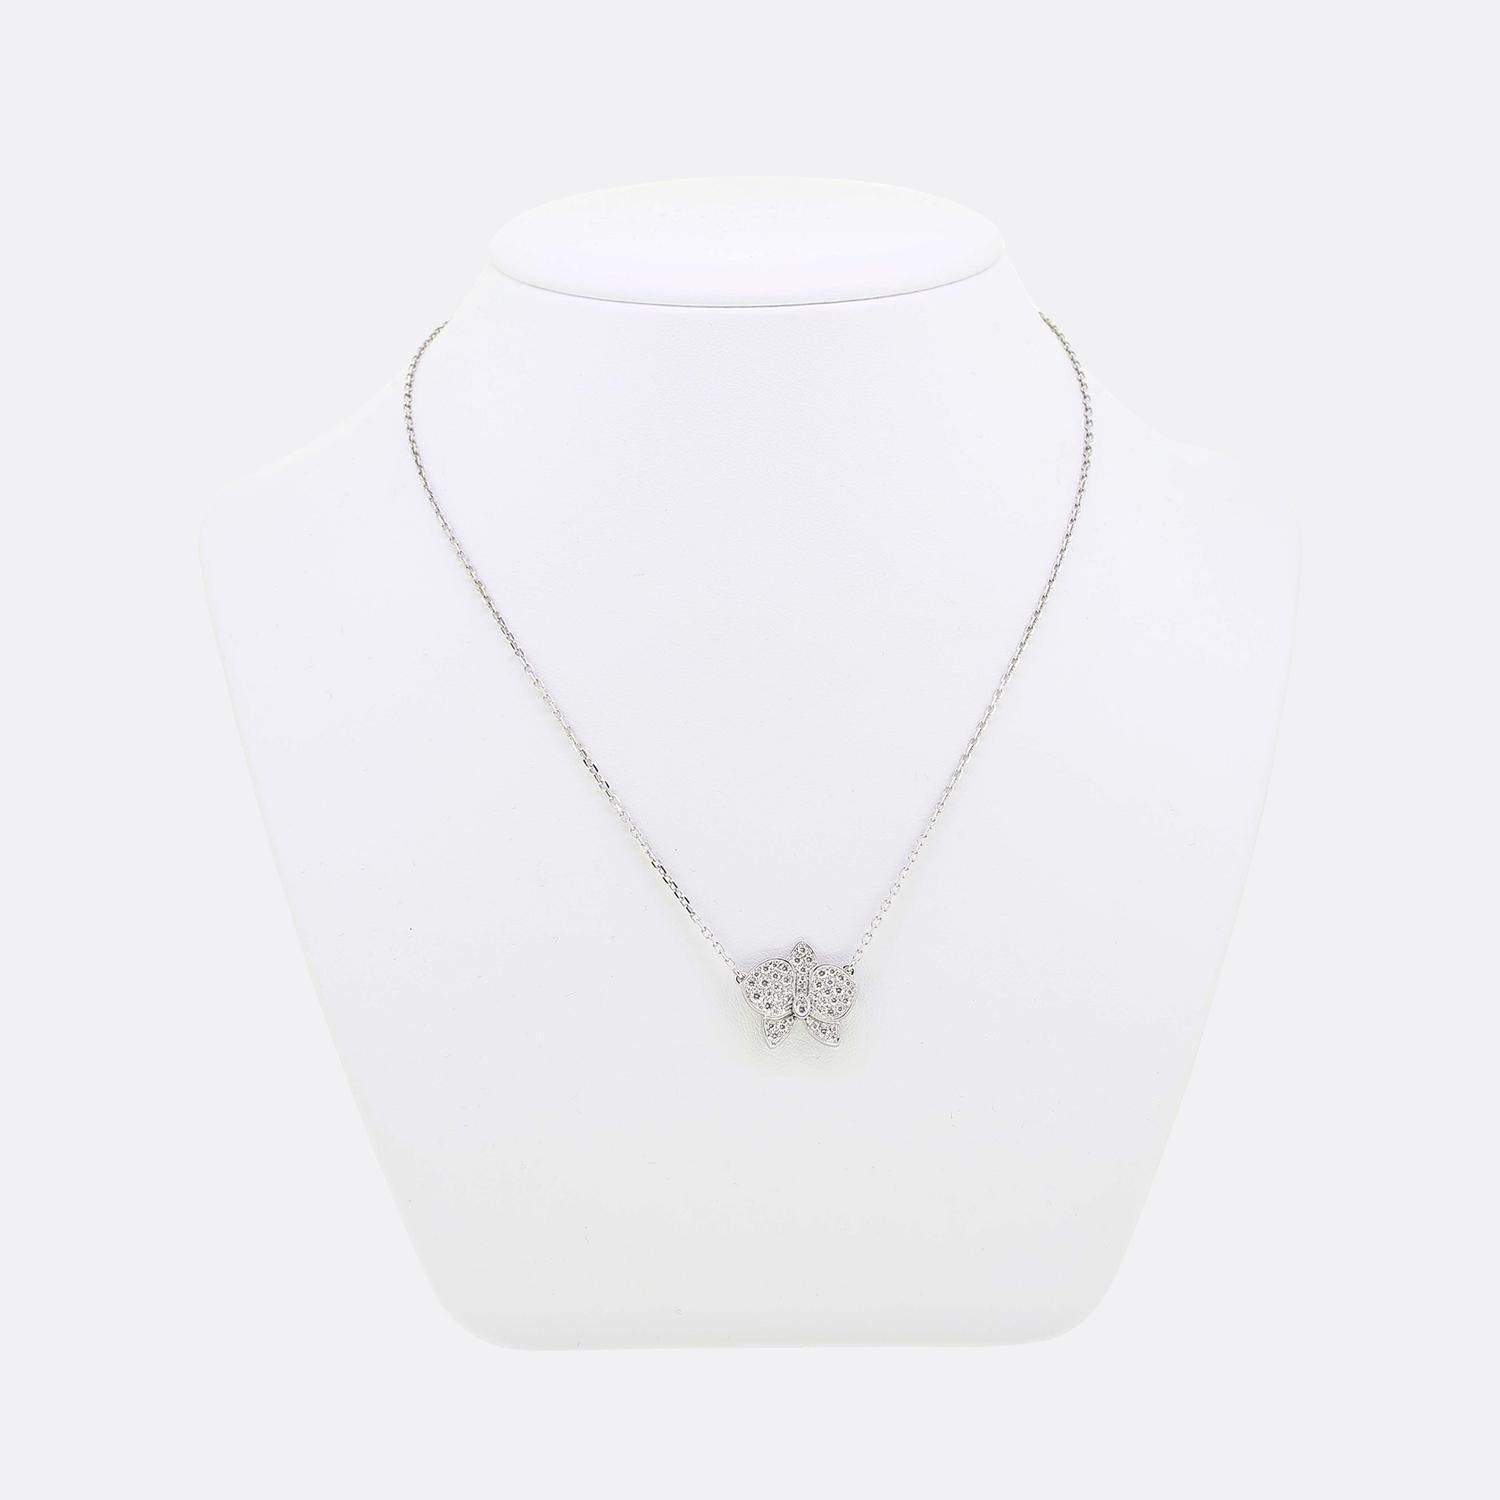 Here we have a stunning necklace from the world renowned jewellery house of Cartier. This is the Caresse d'Orchidées par Cartier necklaces showcases a butterfly-like motif pendant which has been pavé with a vast array of round brilliant cut diamonds